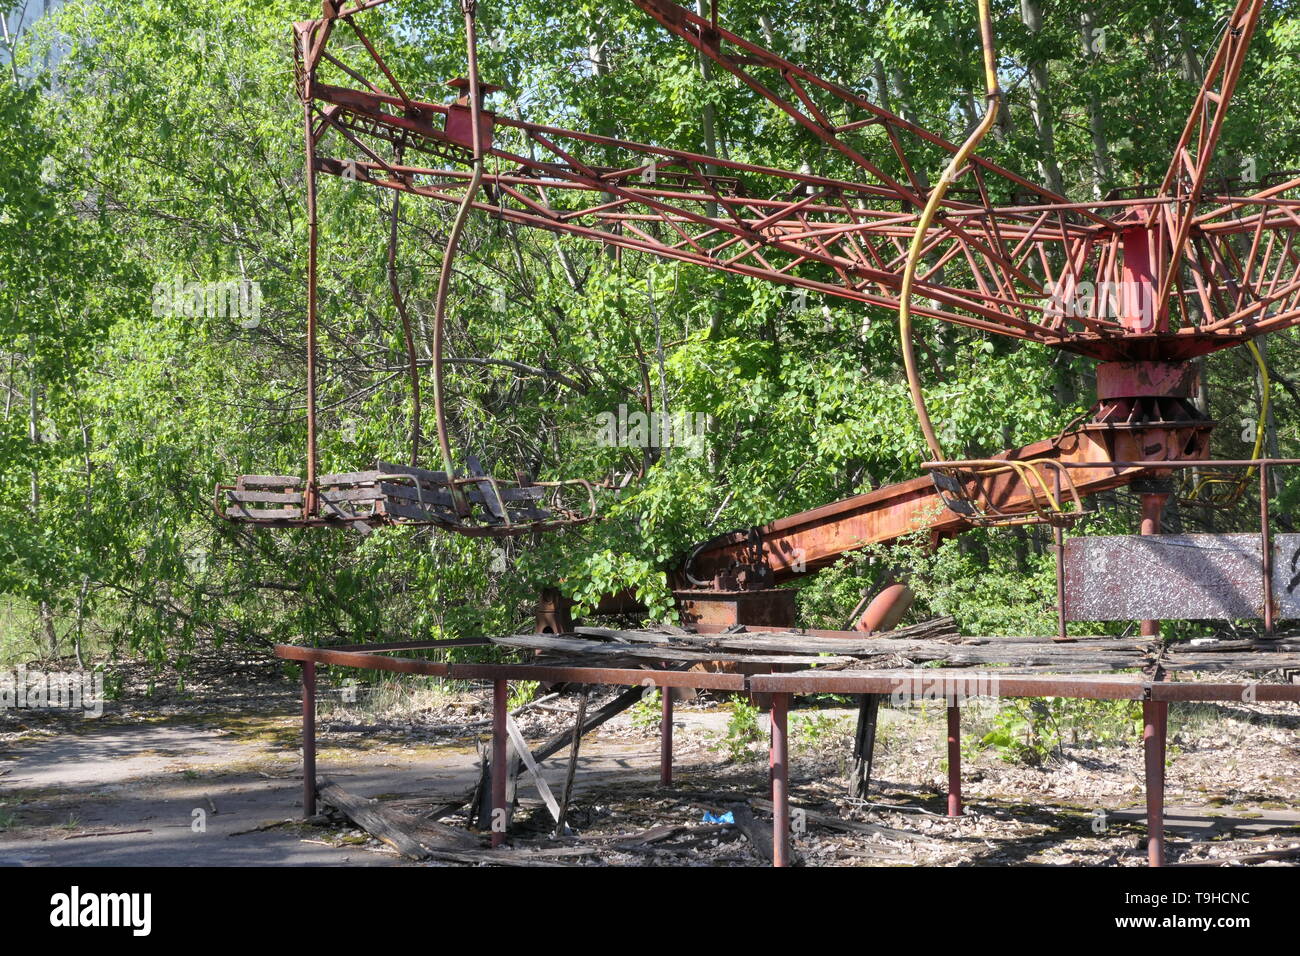 Abandoned carousel in the amusement park near the ghost town of Pripyat, Chernobyl exclusion zone, Ukraine Stock Photo